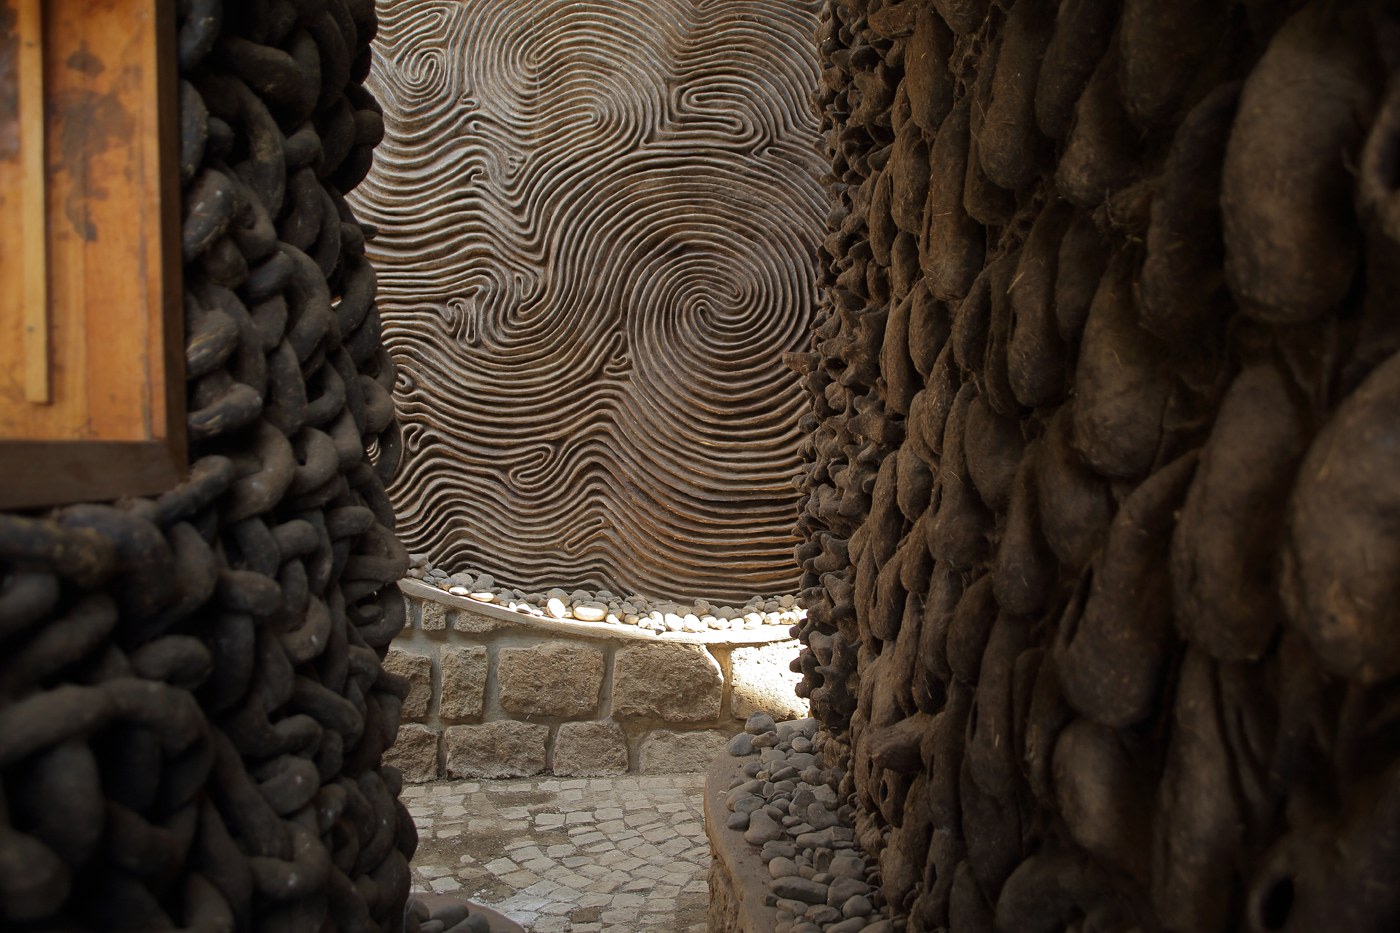 woven and swirling walls